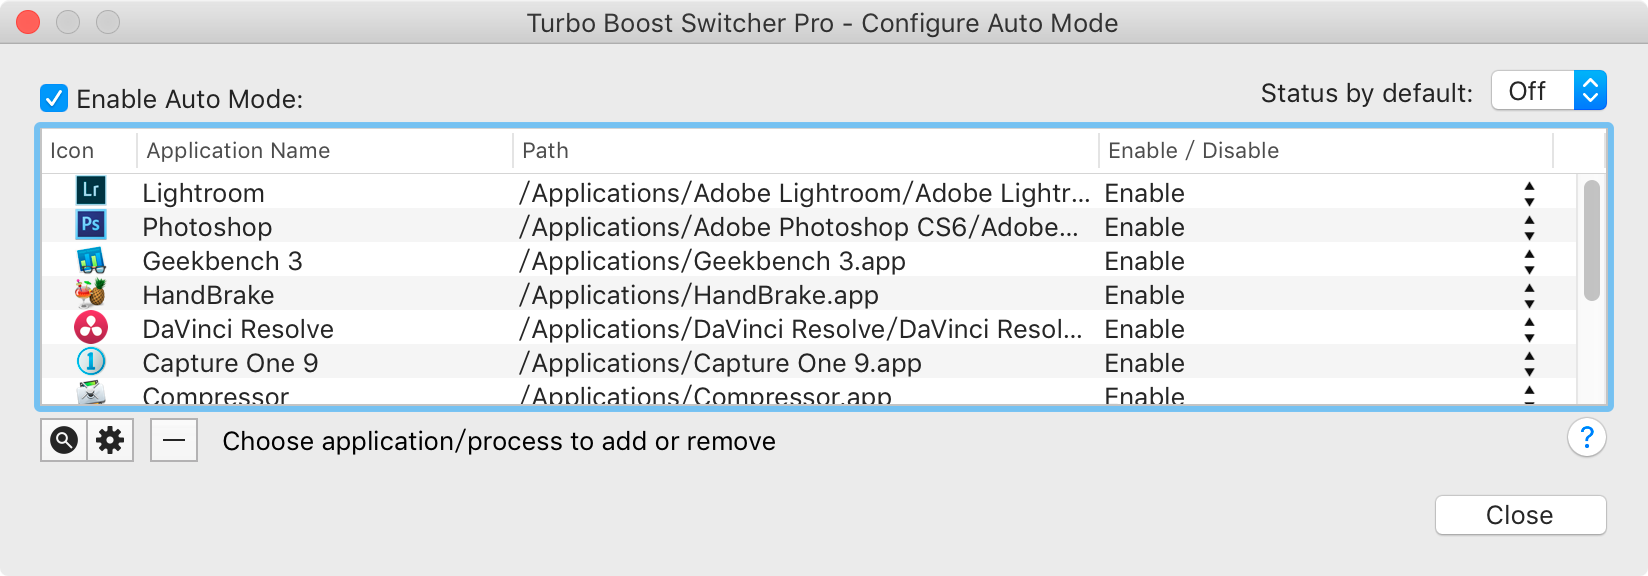 turbo boost switcher wants to make changes popup